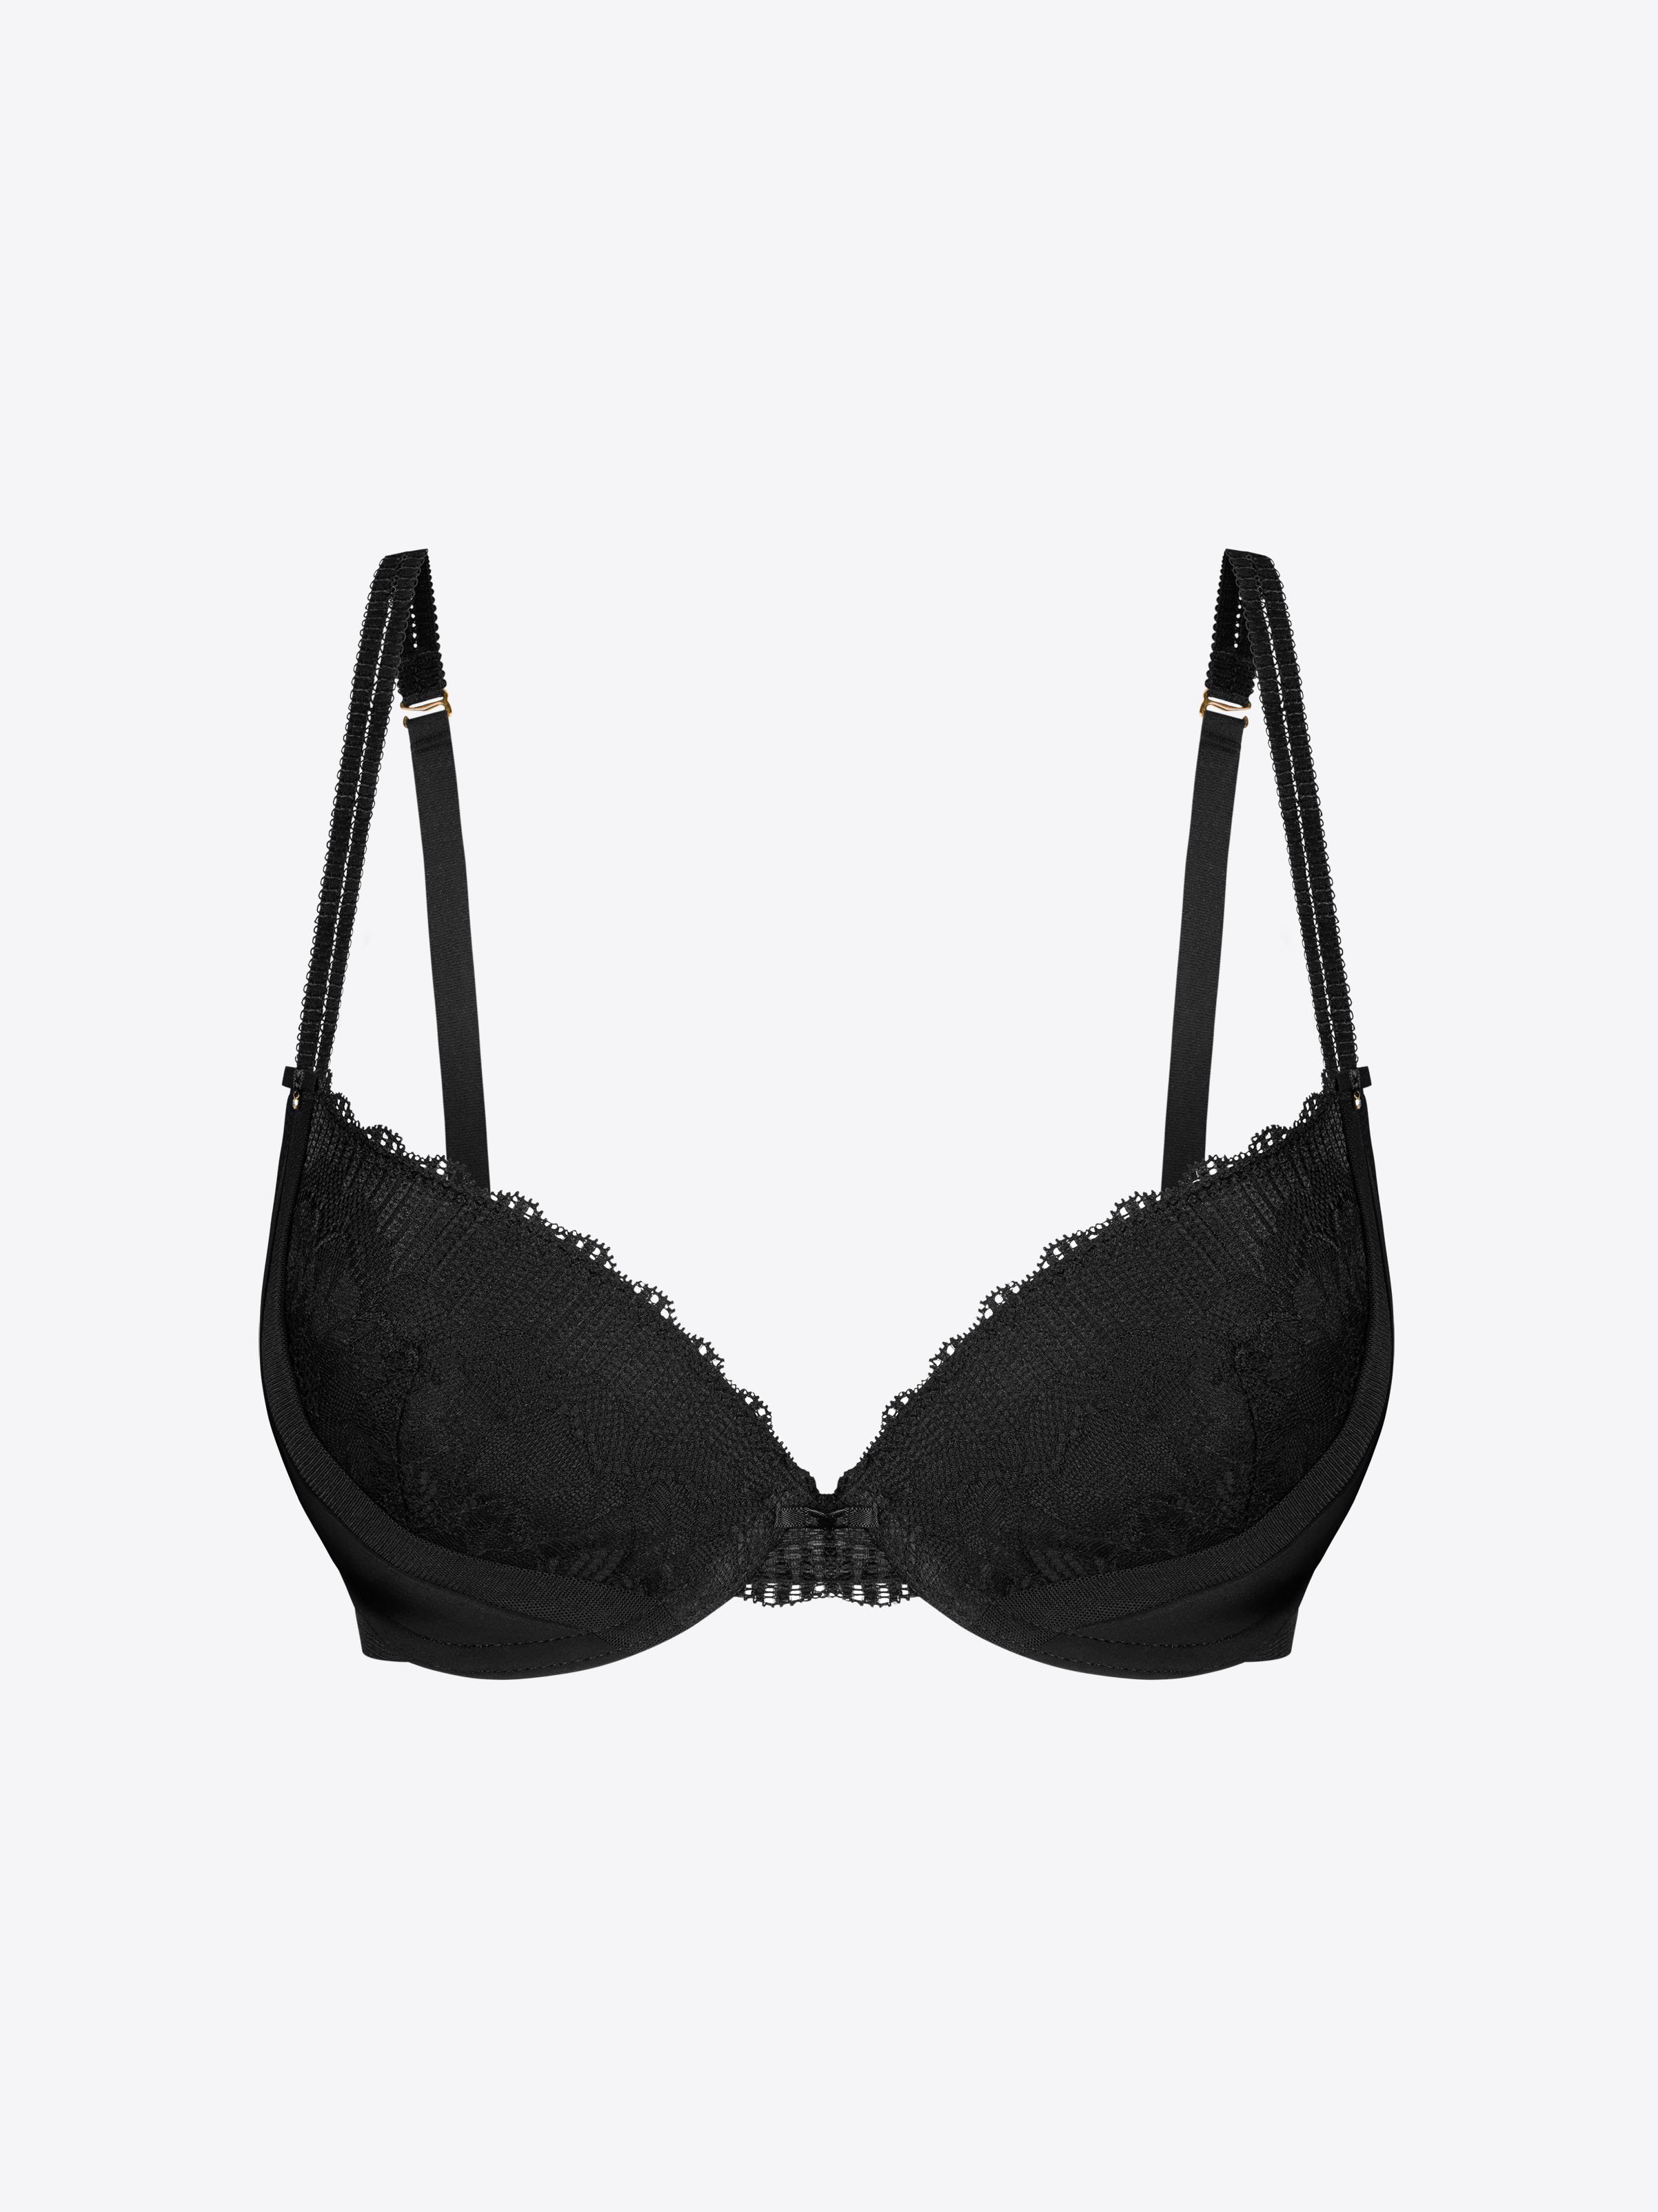 Casual Vintage Anti-Slip Bralette, Fashion Push-Up Cool Uplift Smoothing  Lingerie, Comfy Stretchy Sculpting Bras for Women Black at  Women's  Clothing store